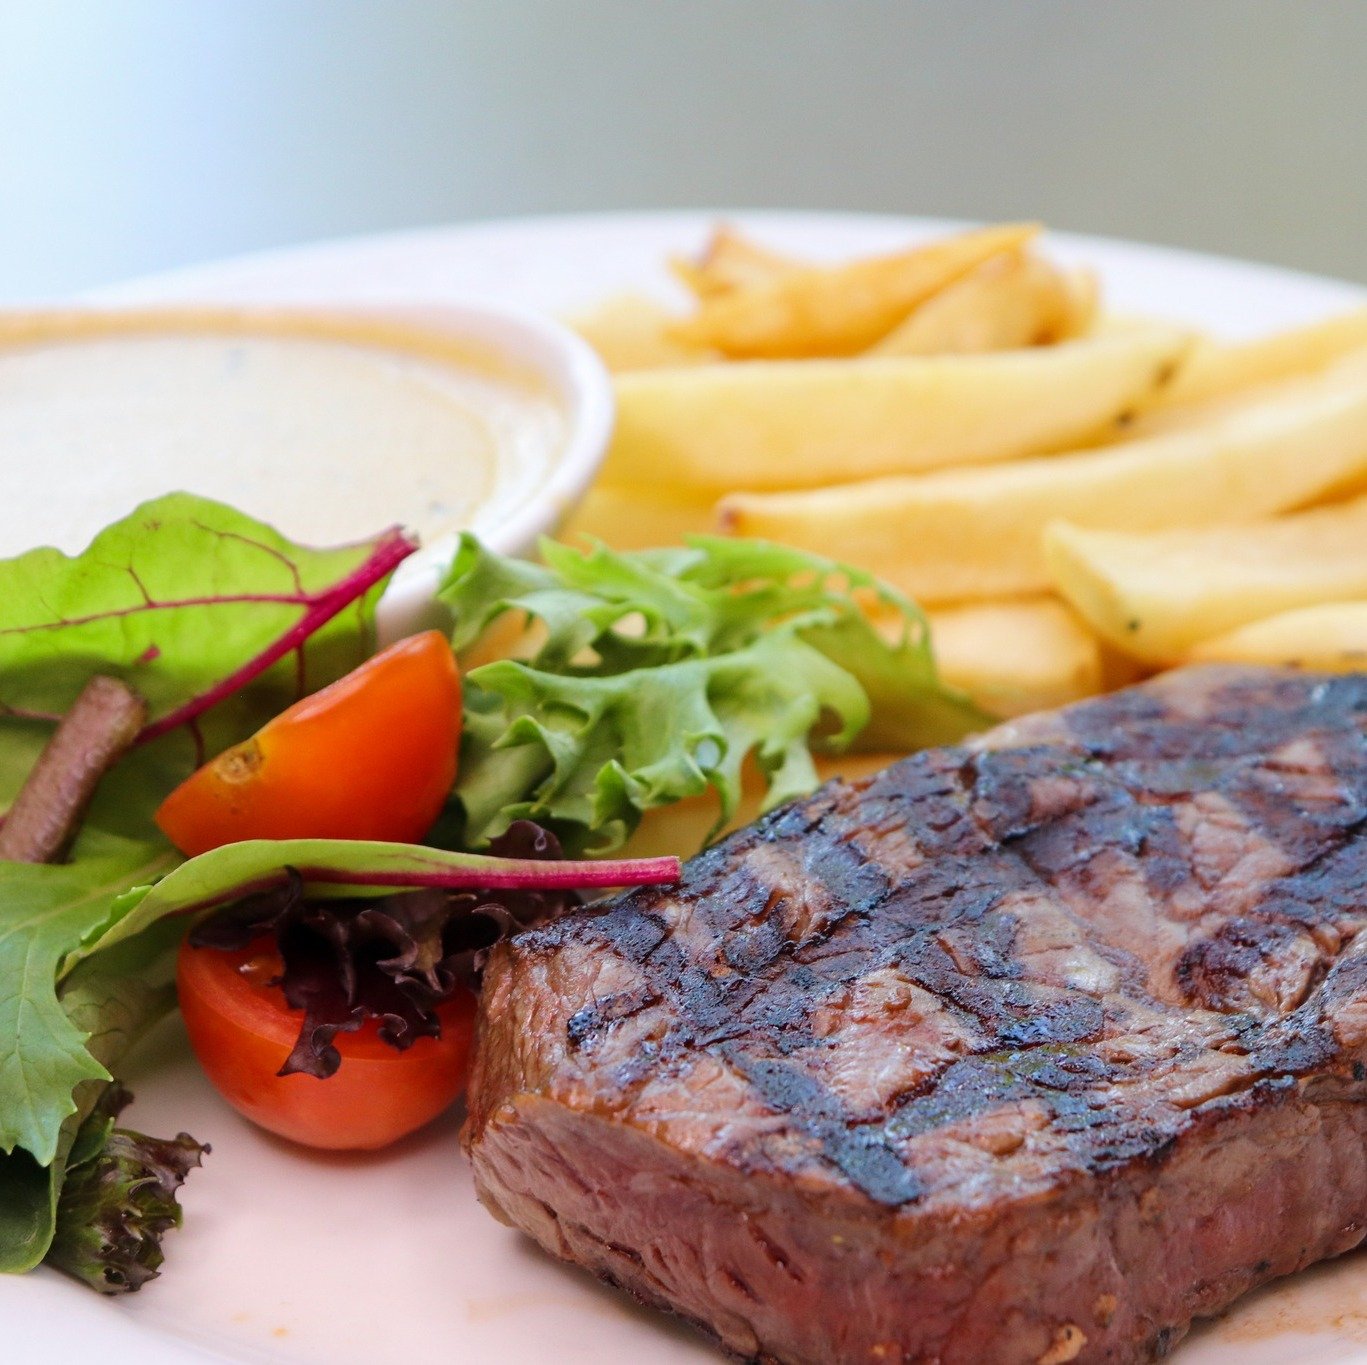 Every Thursday night, enjoy a 250g Porterhouse Steak with sides, plus a free house schooner, wine, or soft drink for just $25! 😍🥩

🔗 Learn more about our Bistro specials through our promotions page on our website.

#HellenicClubCanberra
*18+ only.